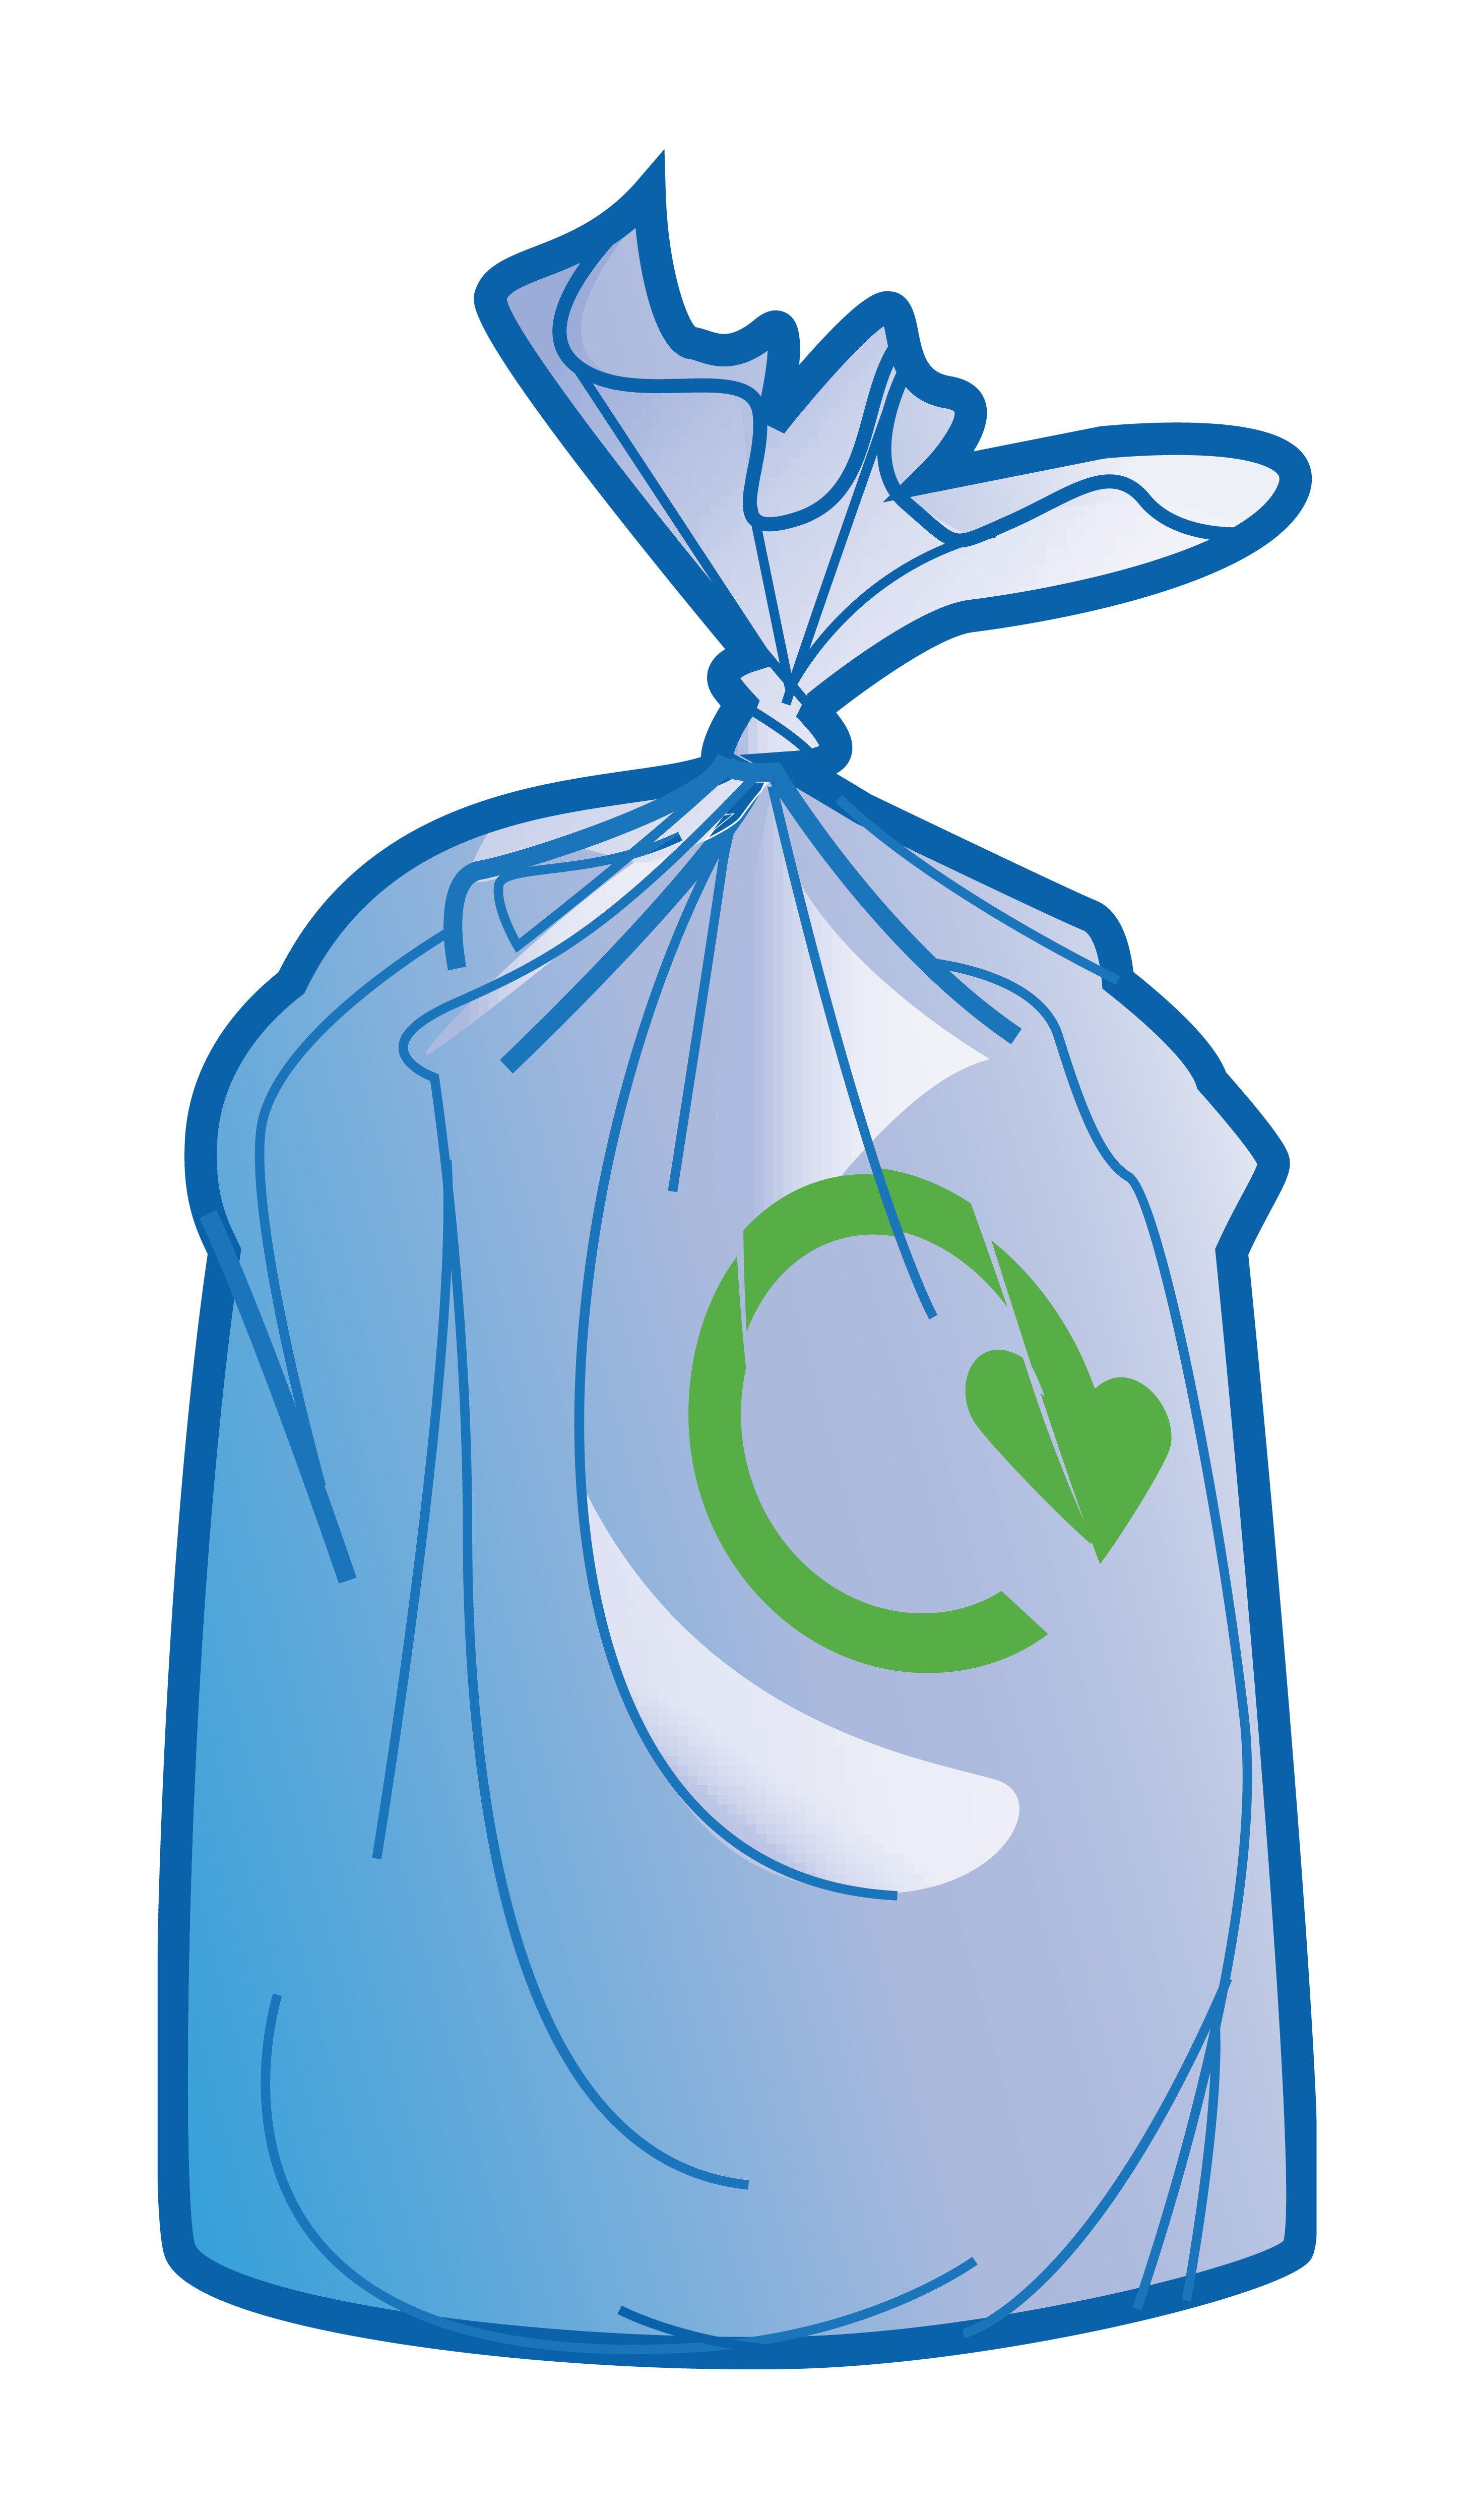 What can I recycle? | Colchester Borough Council